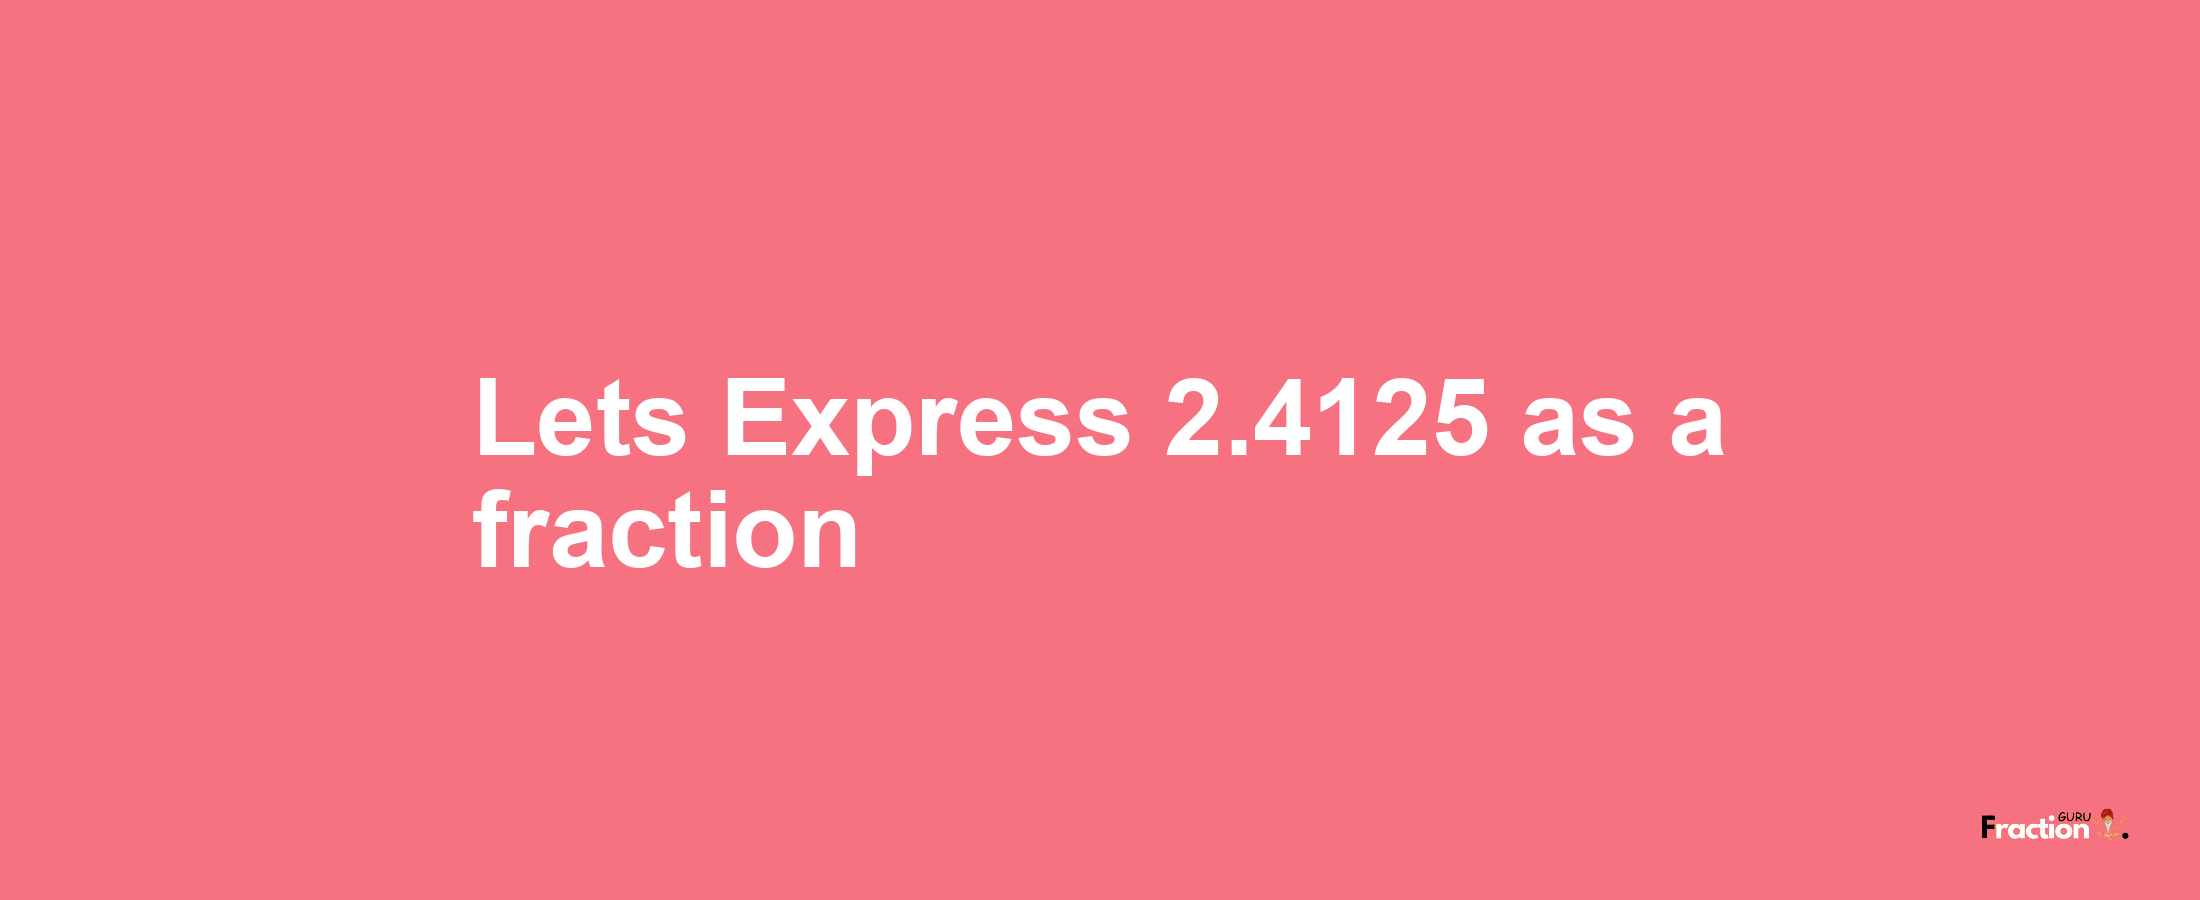 Lets Express 2.4125 as afraction